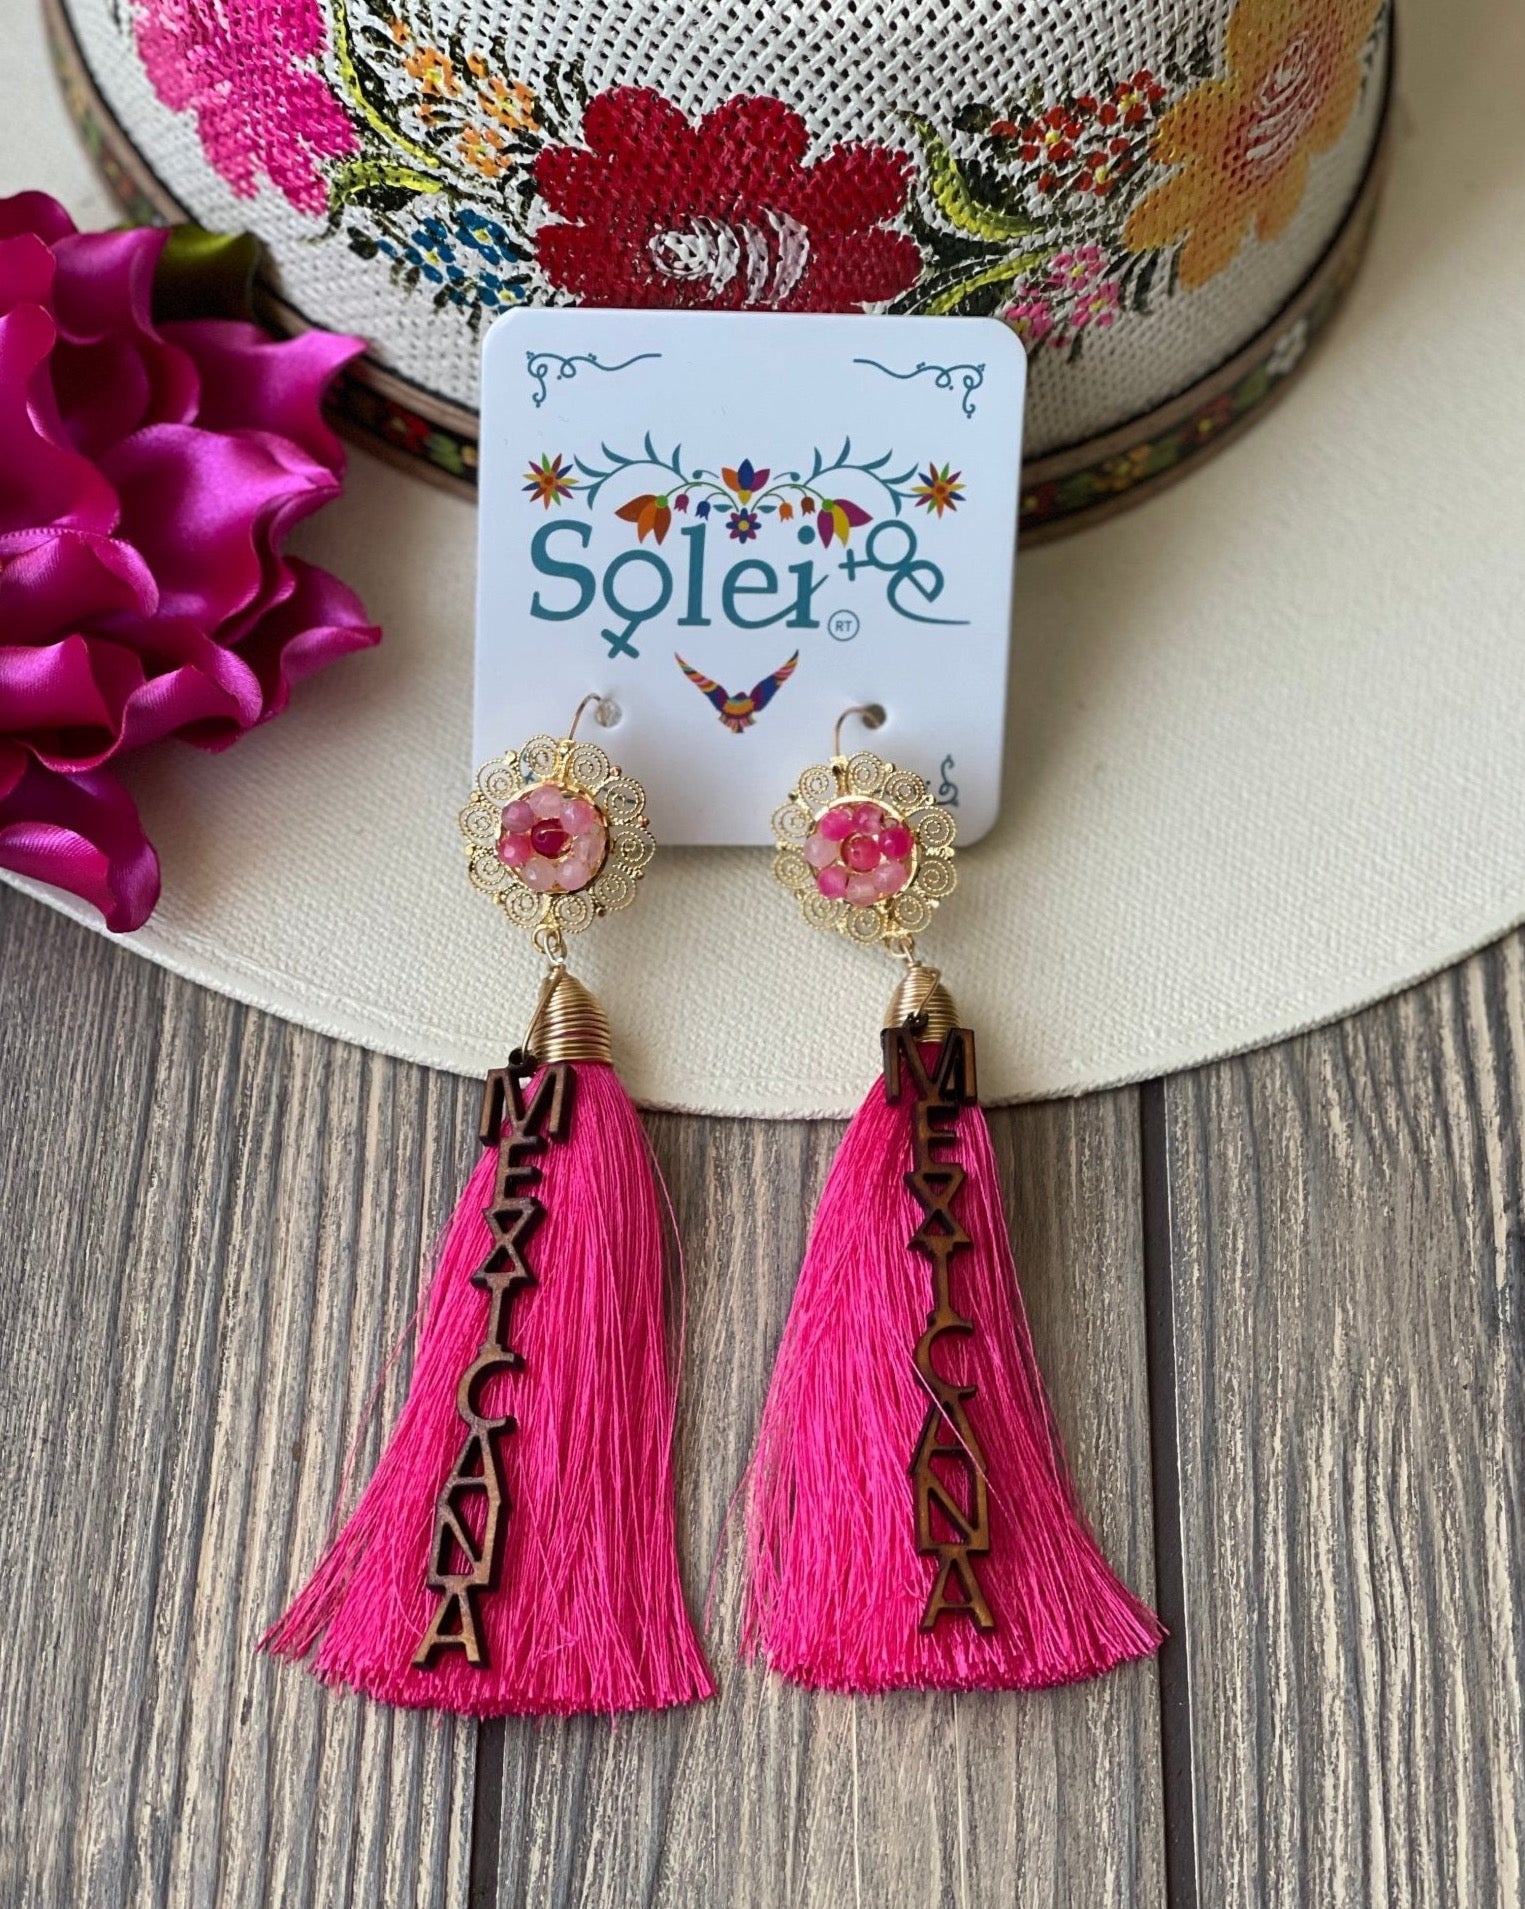 Mexican Traditional Artisanal Earrings. Aretes Mexicana. - Solei Store